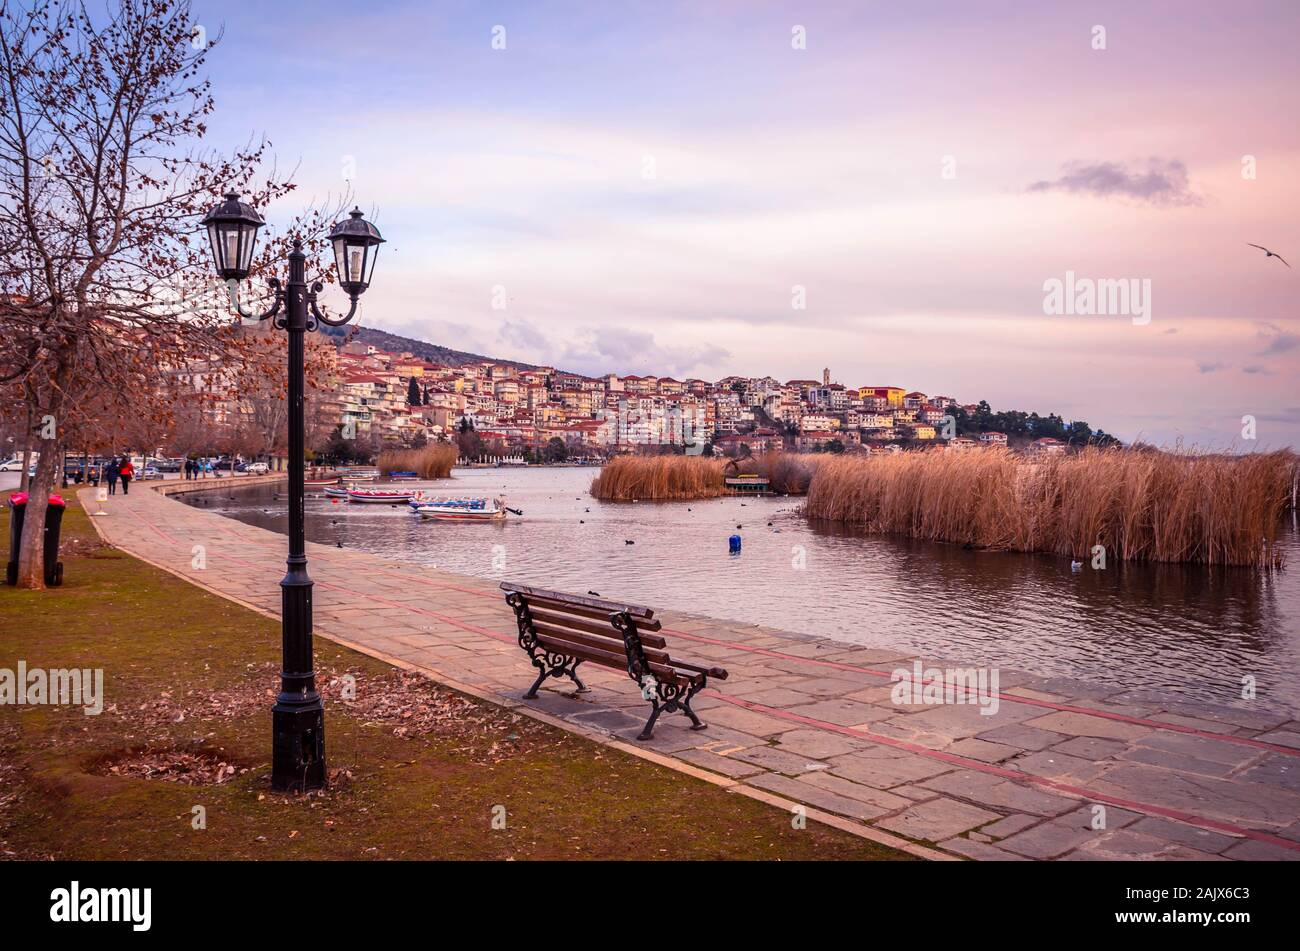 Atmospheric view of city of Kastoria and Orestiada lake at sunset.The promanade with bench and street lights in foreground. Stock Photo